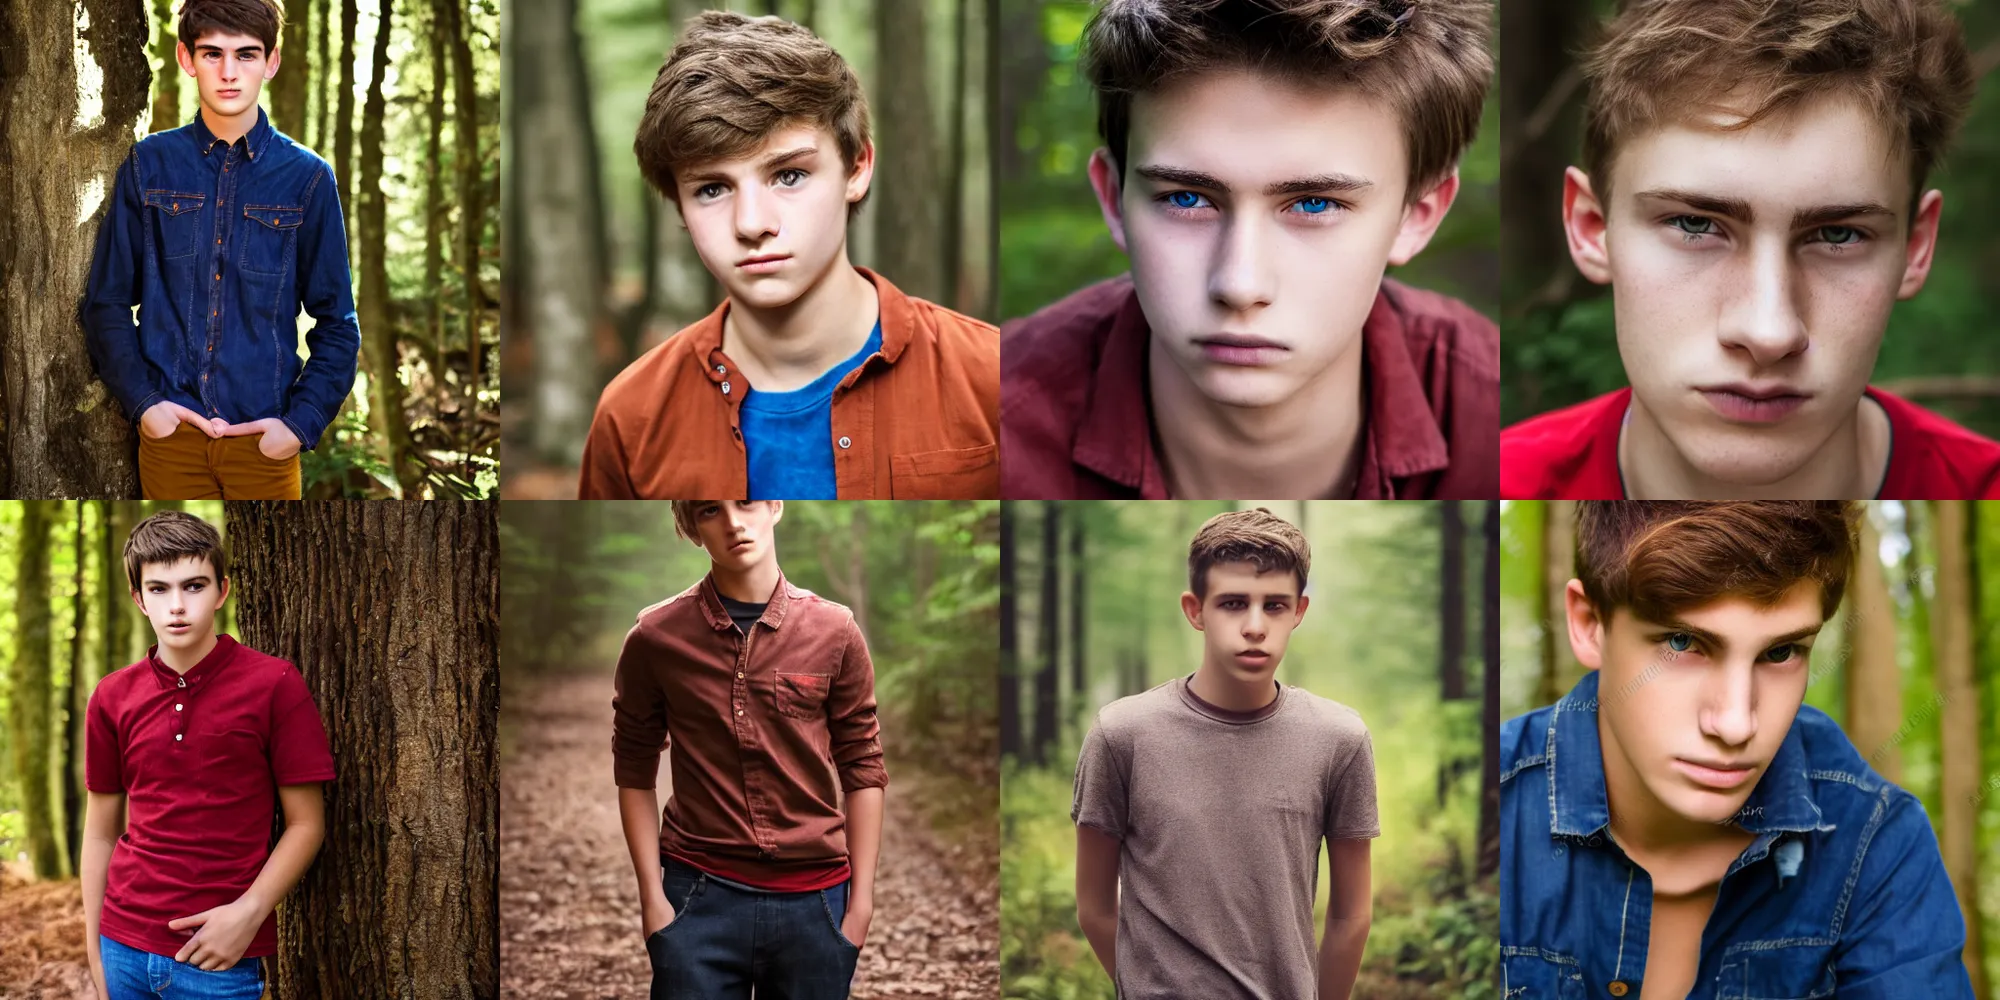 Prompt: portrait, male teenager, detailed face, brown hair, red shirt, blue jeans, dark shaped eyes, walking in forest, realistic photo.